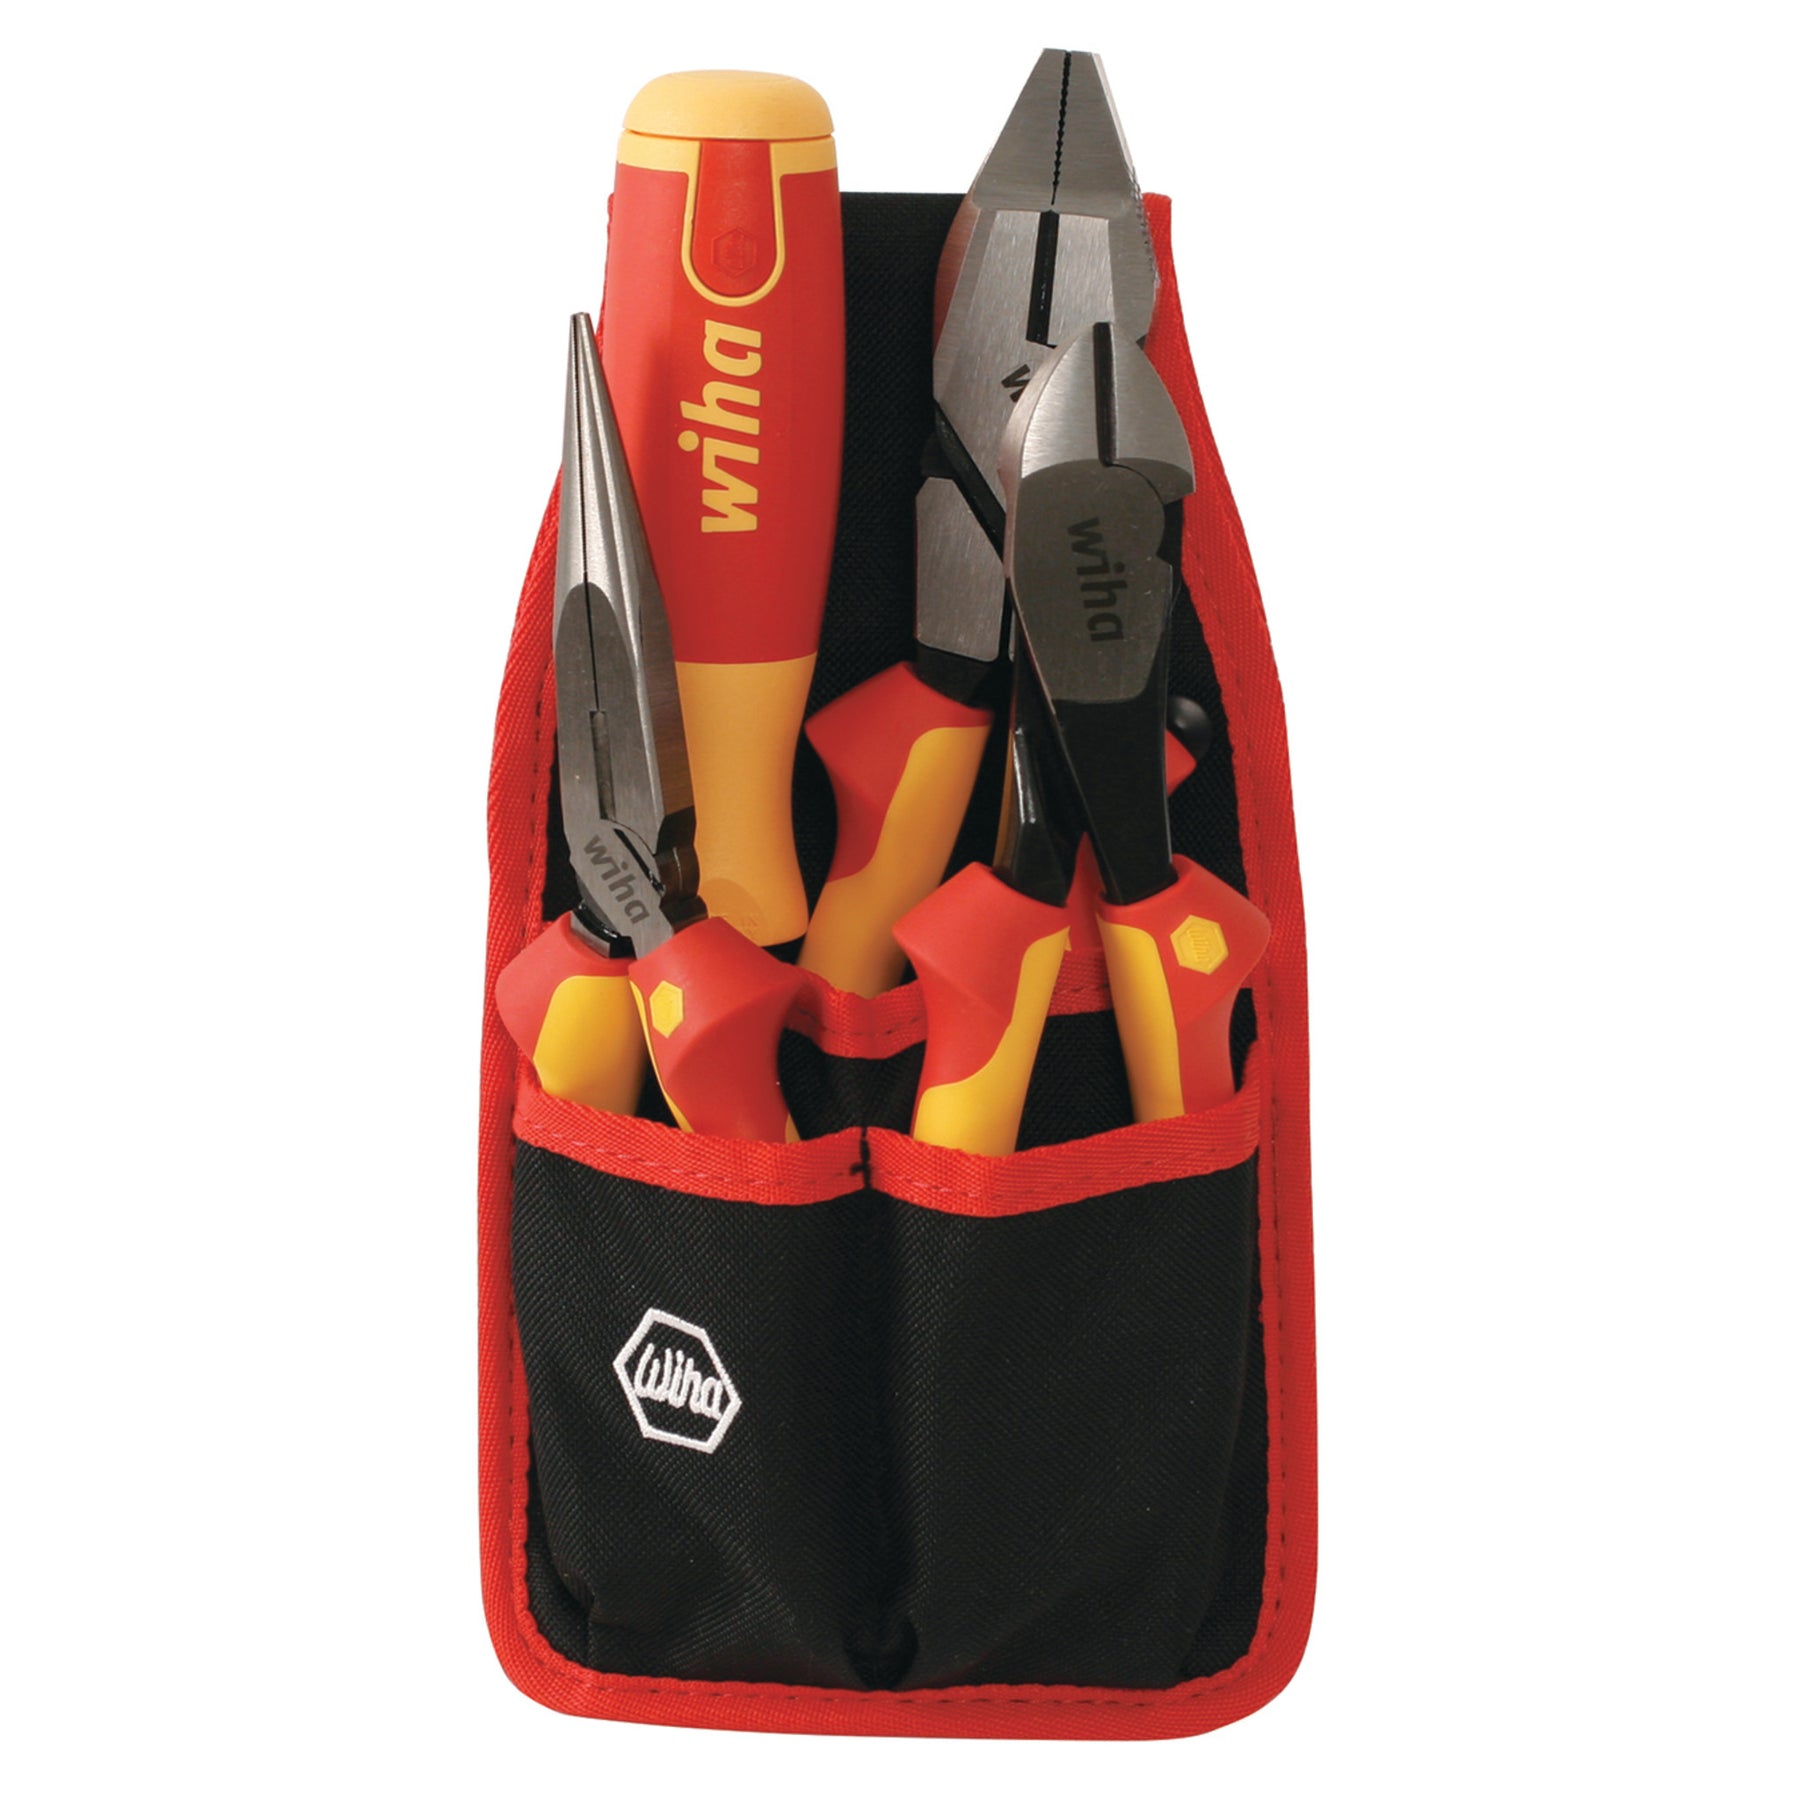 17 Piece Insulated Pliers-Cutters and Pop-Up Set